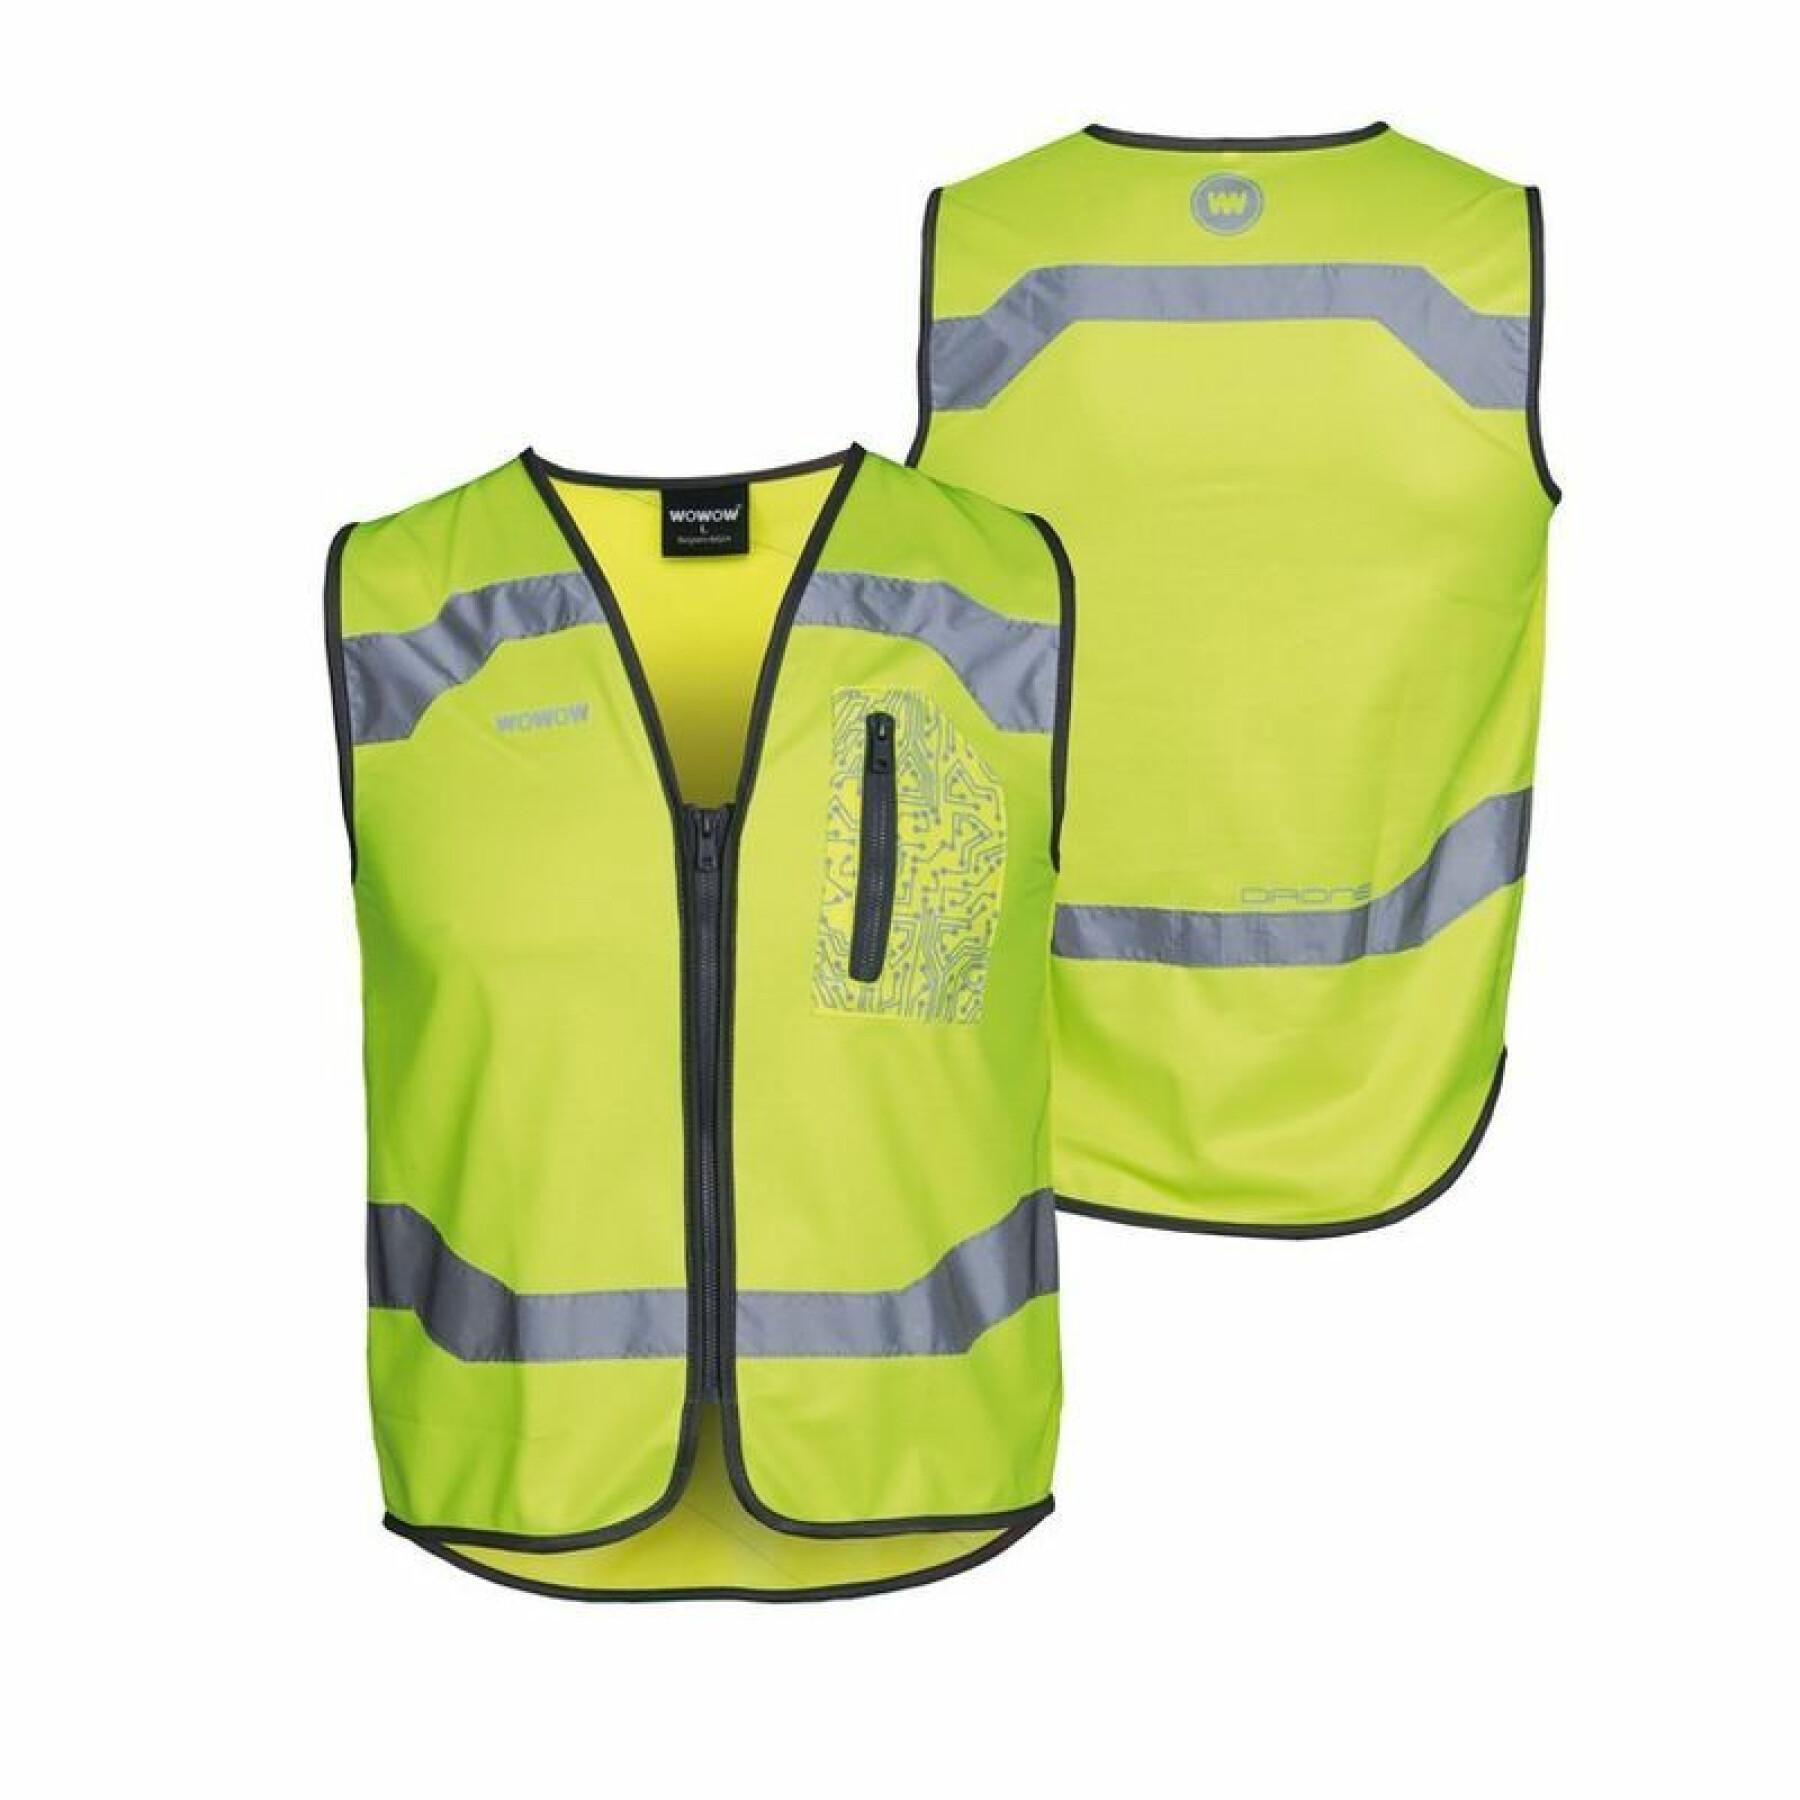 Reflective safety vest Wowow Drone